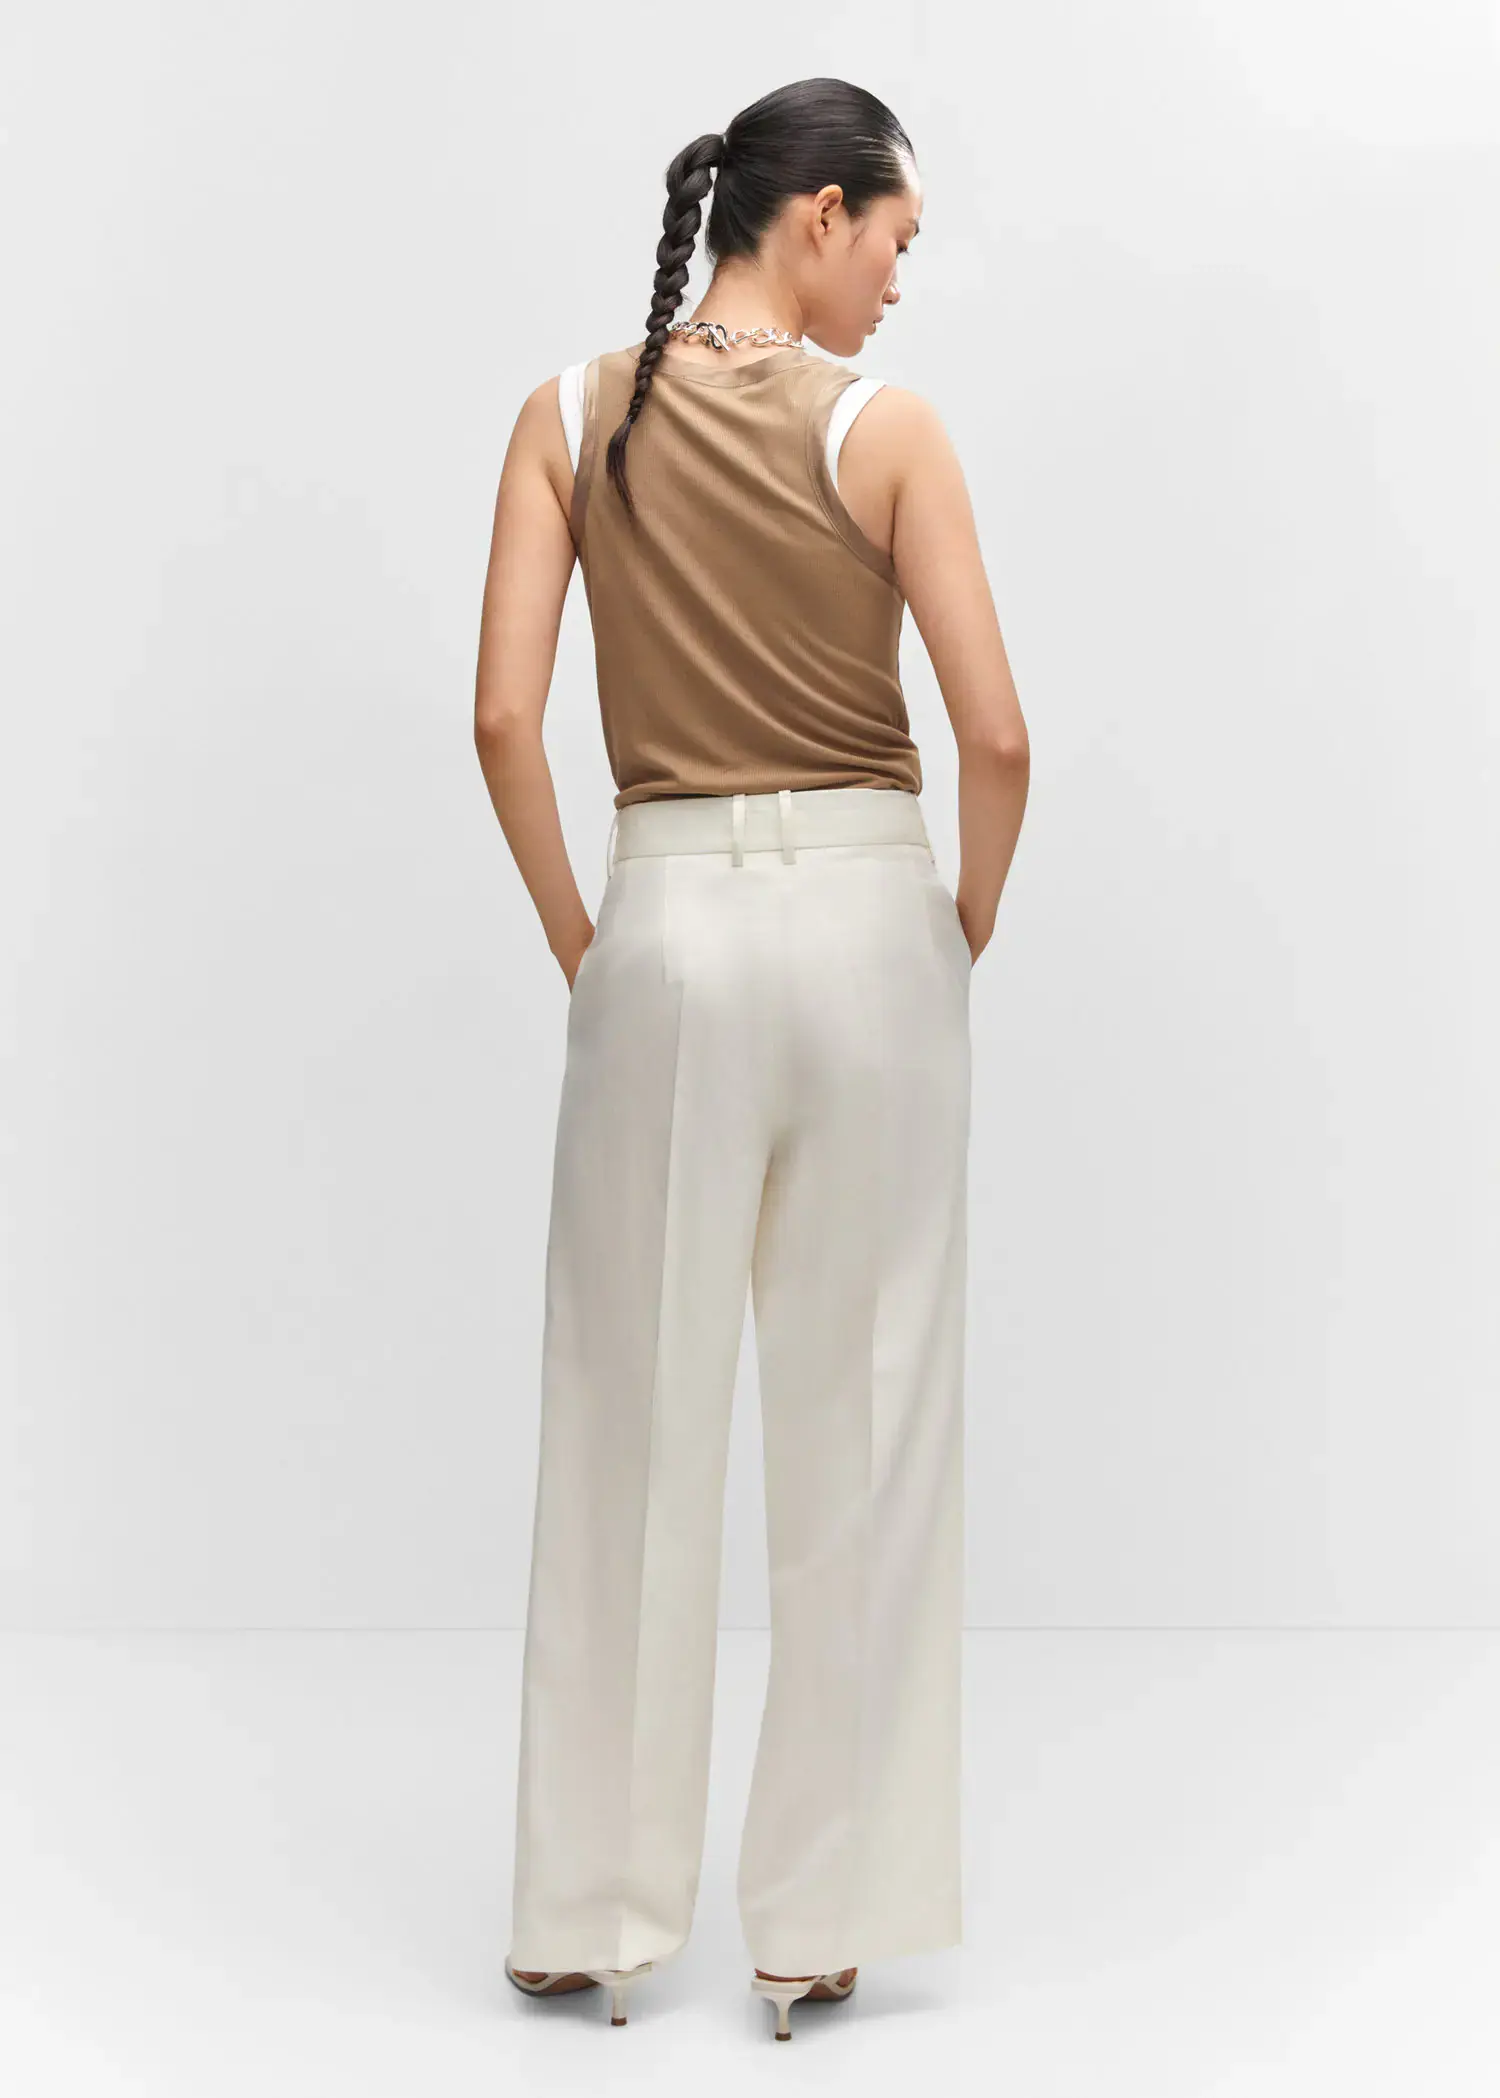 Mango Wideleg pleated pants. a woman in a tan tank top and white pants. 